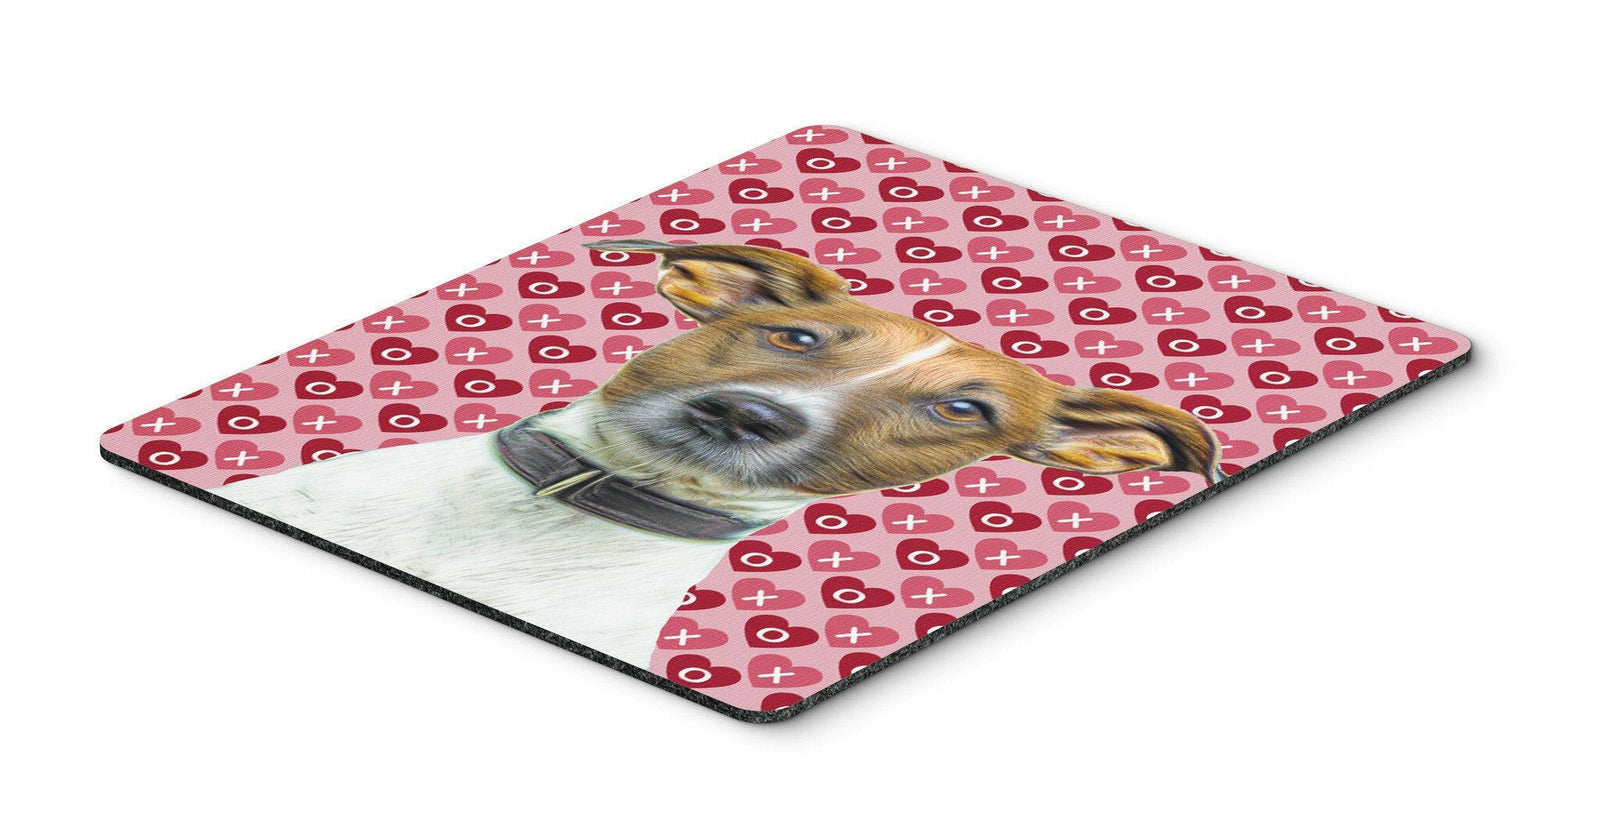 Hearts Love and Valentine's Day Jack Russell Terrier Mouse Pad, Hot Pad or Trivet KJ1190MP by Caroline's Treasures